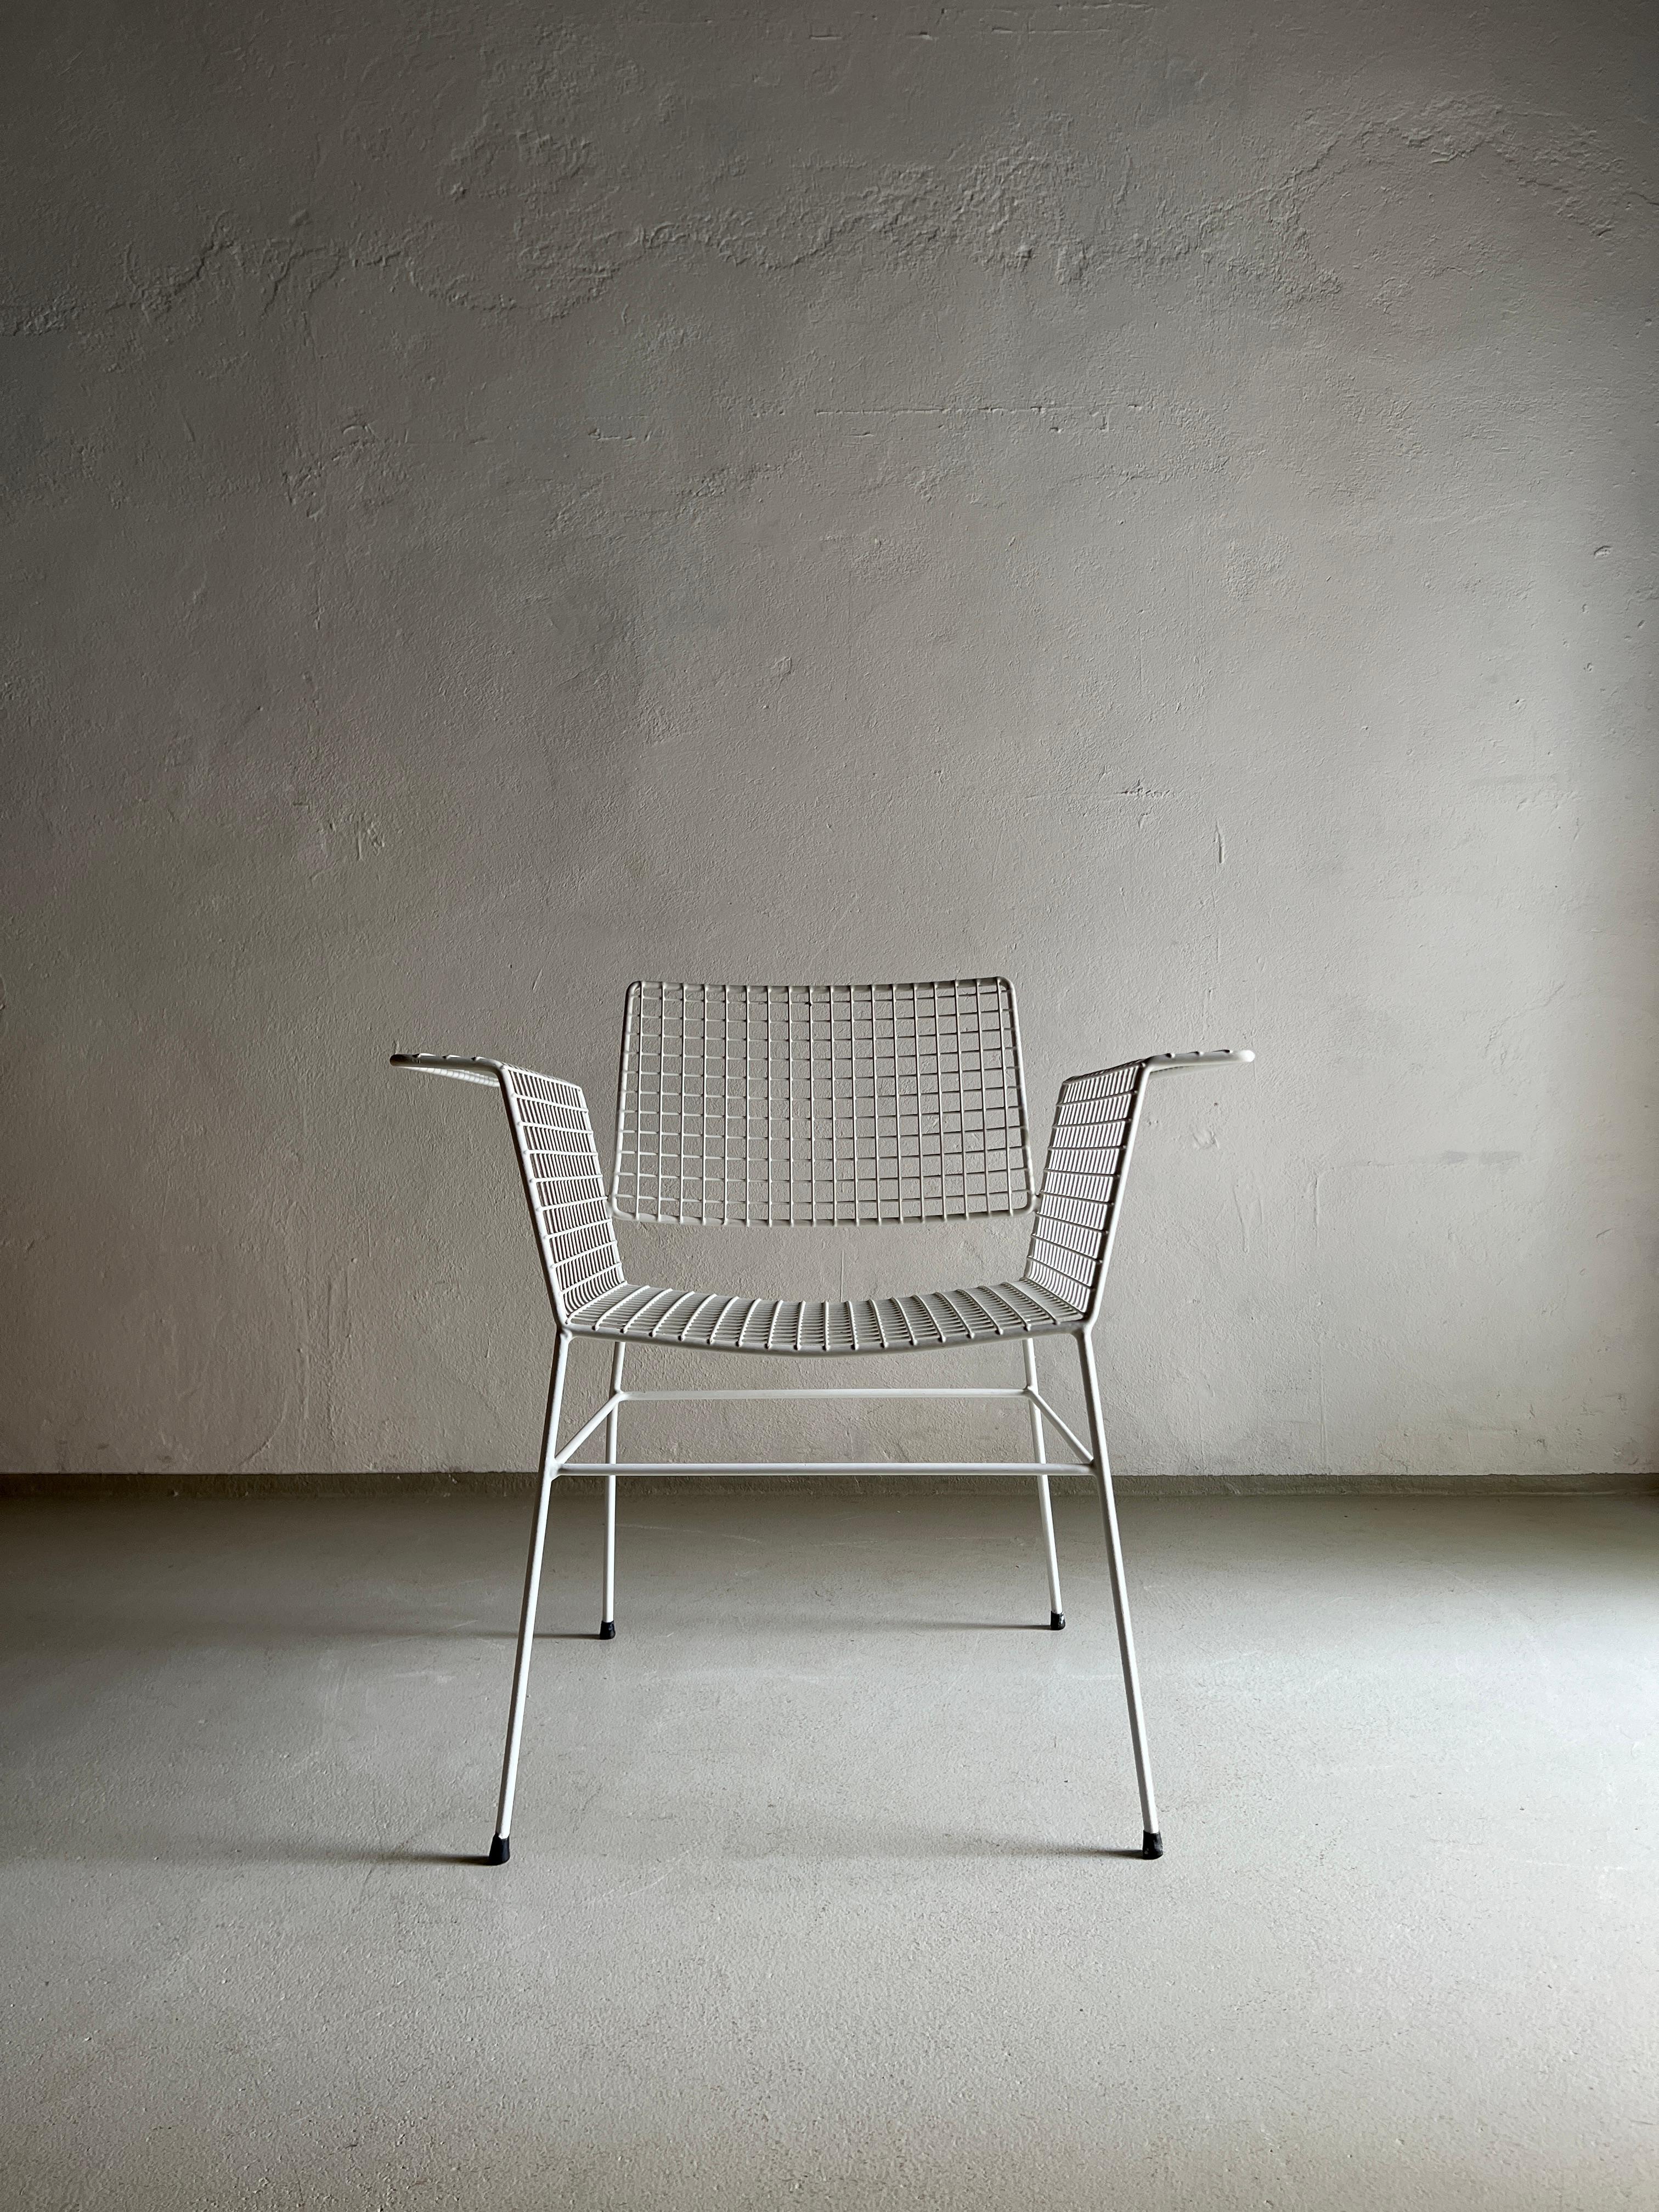 Minimalist White Metal Wire Chair from Erlau Germany, 1960s For Sale